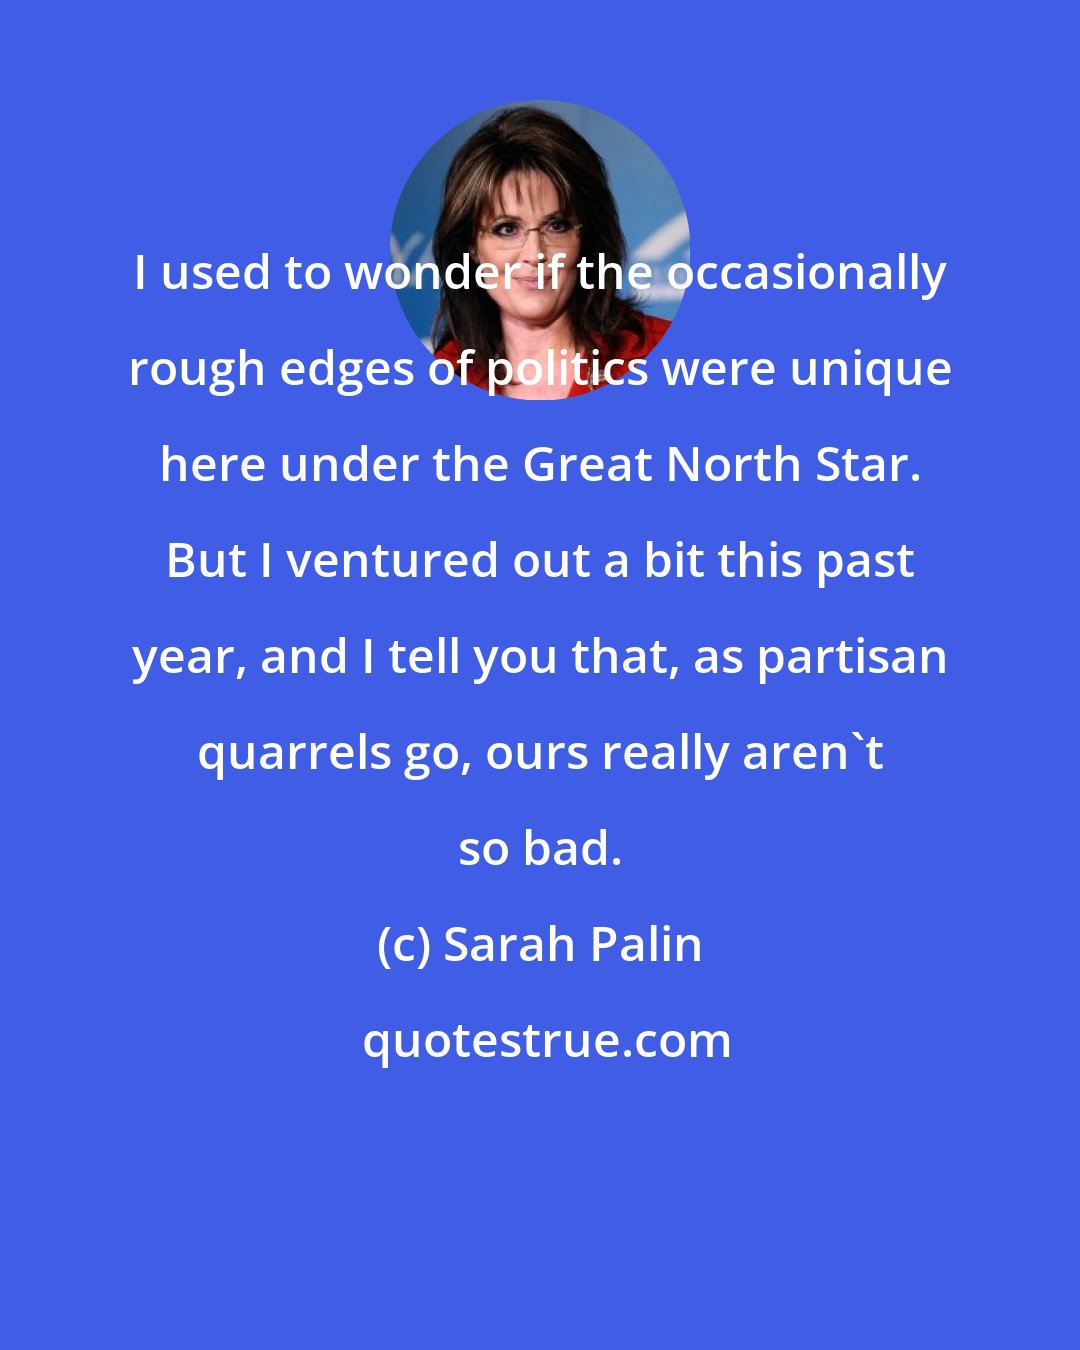 Sarah Palin: I used to wonder if the occasionally rough edges of politics were unique here under the Great North Star. But I ventured out a bit this past year, and I tell you that, as partisan quarrels go, ours really aren't so bad.